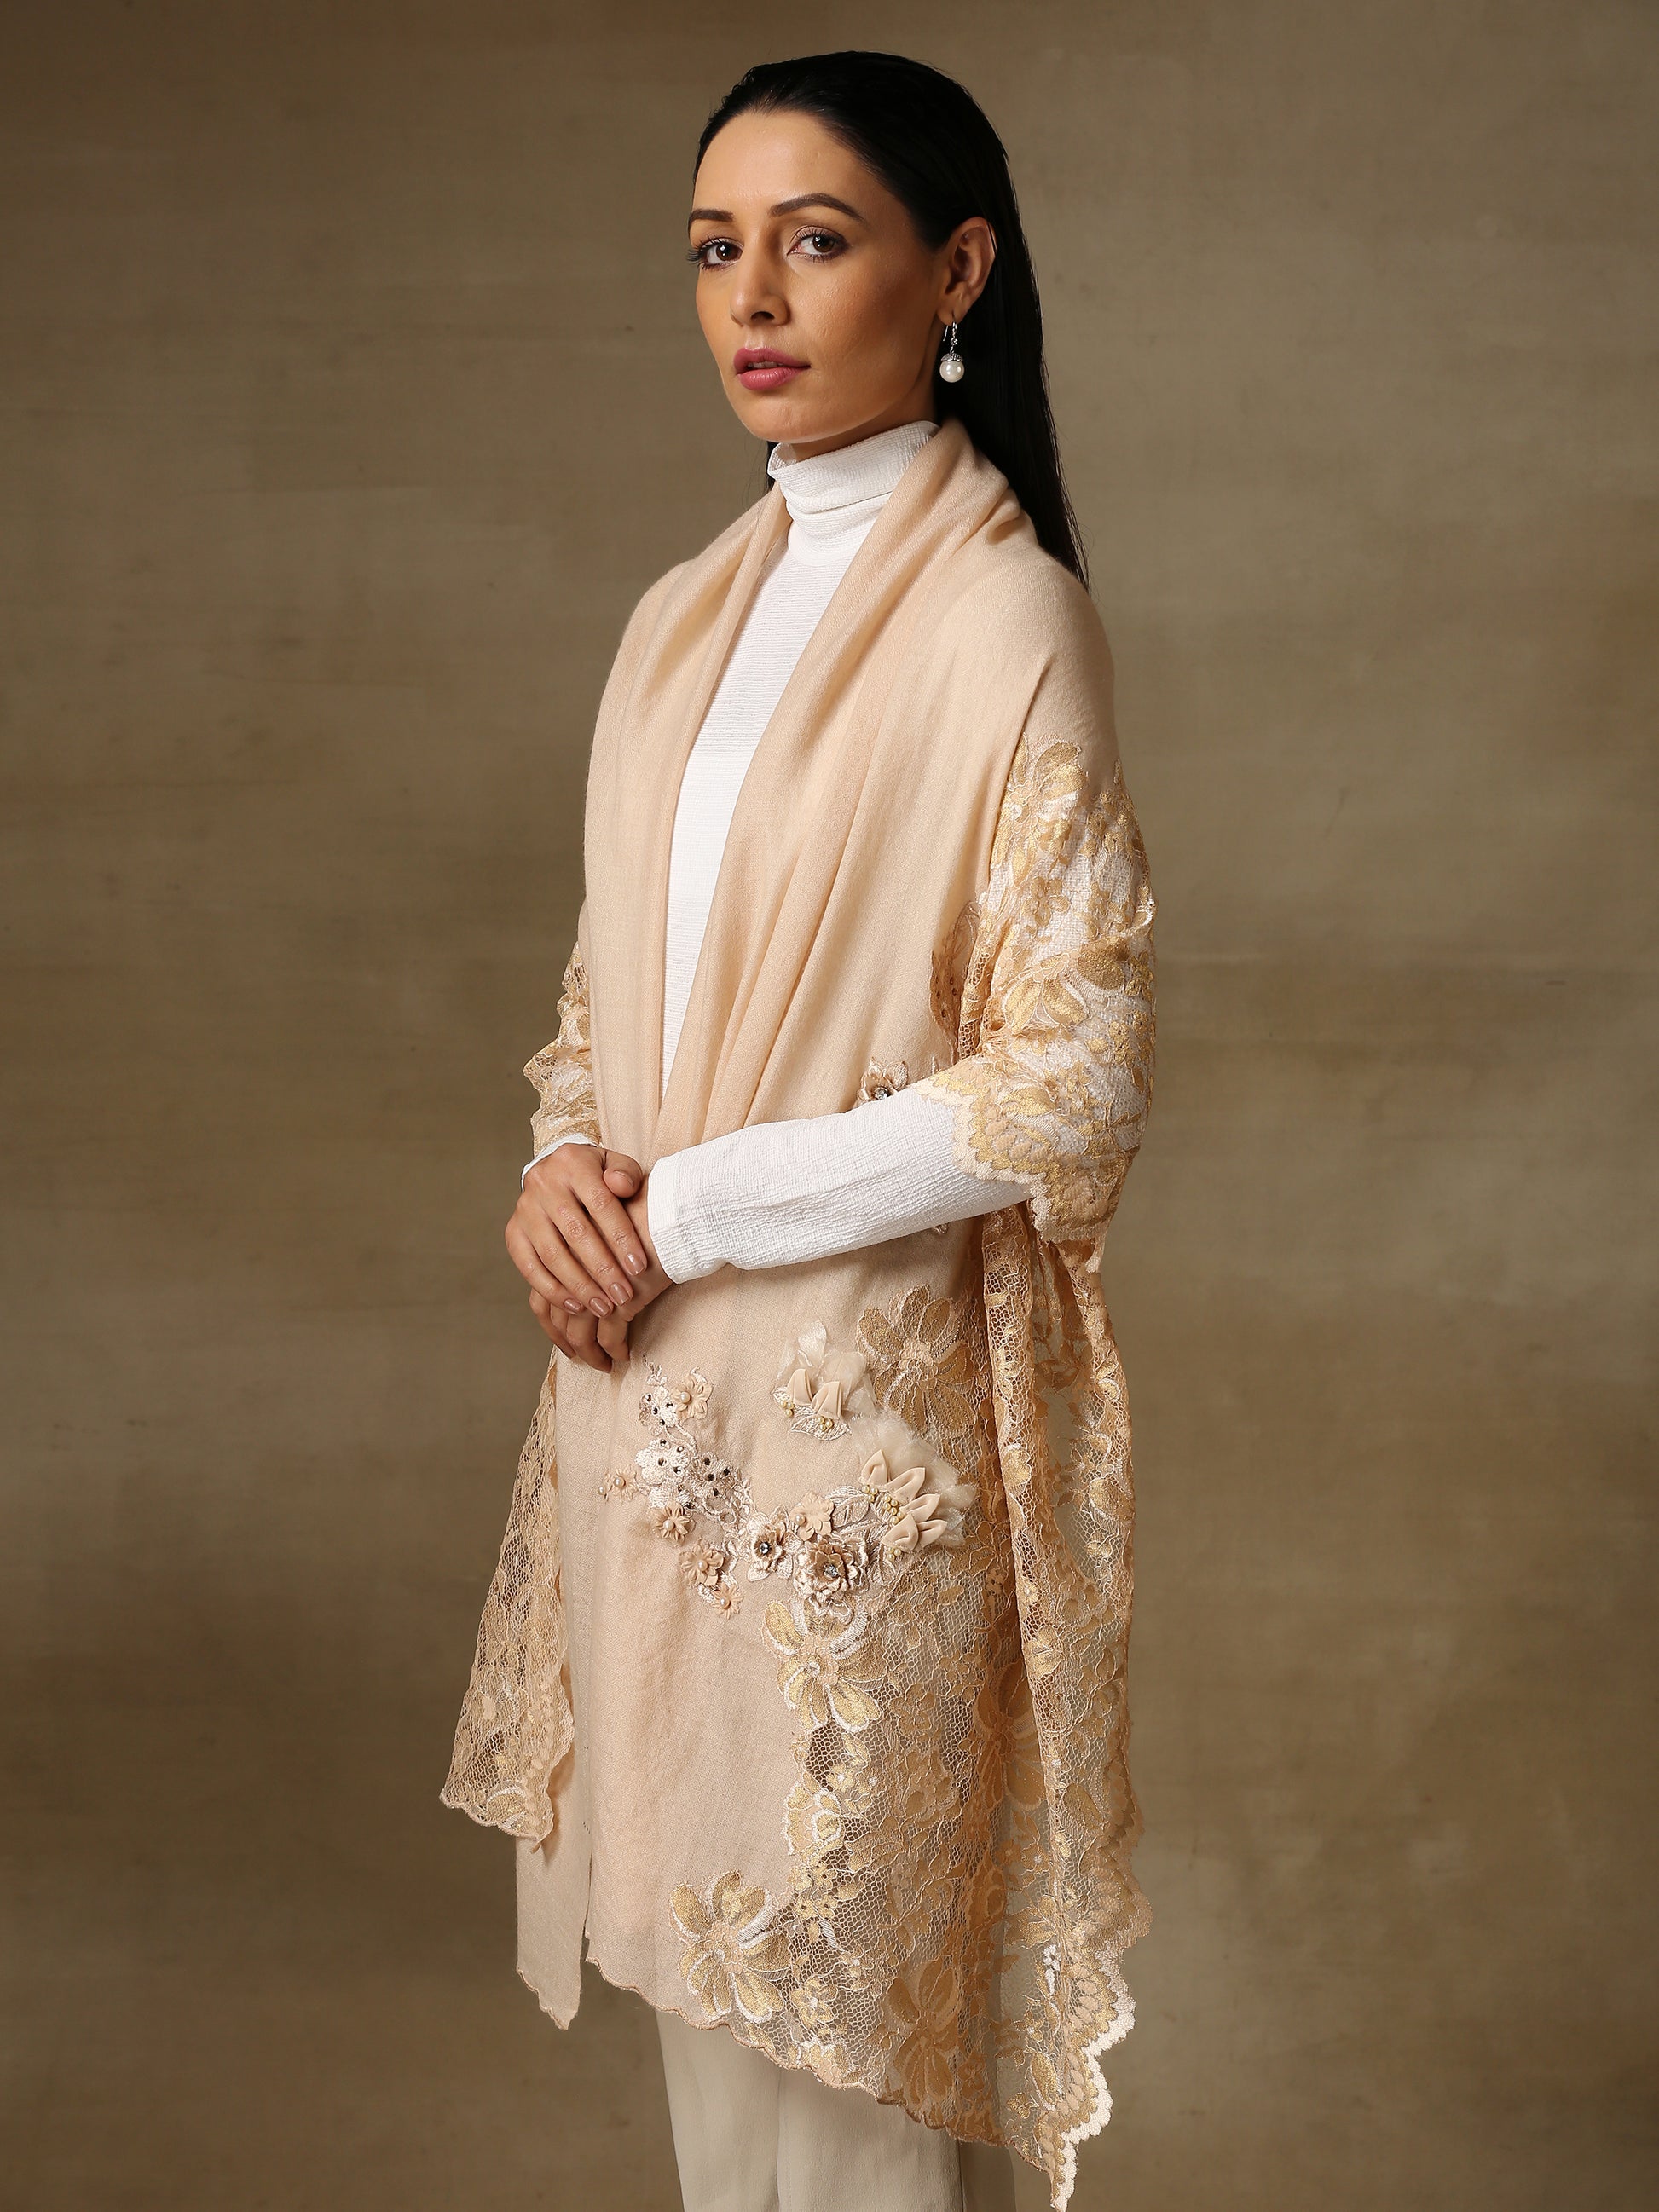 Model is wearing a pashmina stole in a peachy nude are lavishly embellished with floral motifs, made with threadwork, swarovski, pearls, and applique. This stole is from the Elements of spring collection.  